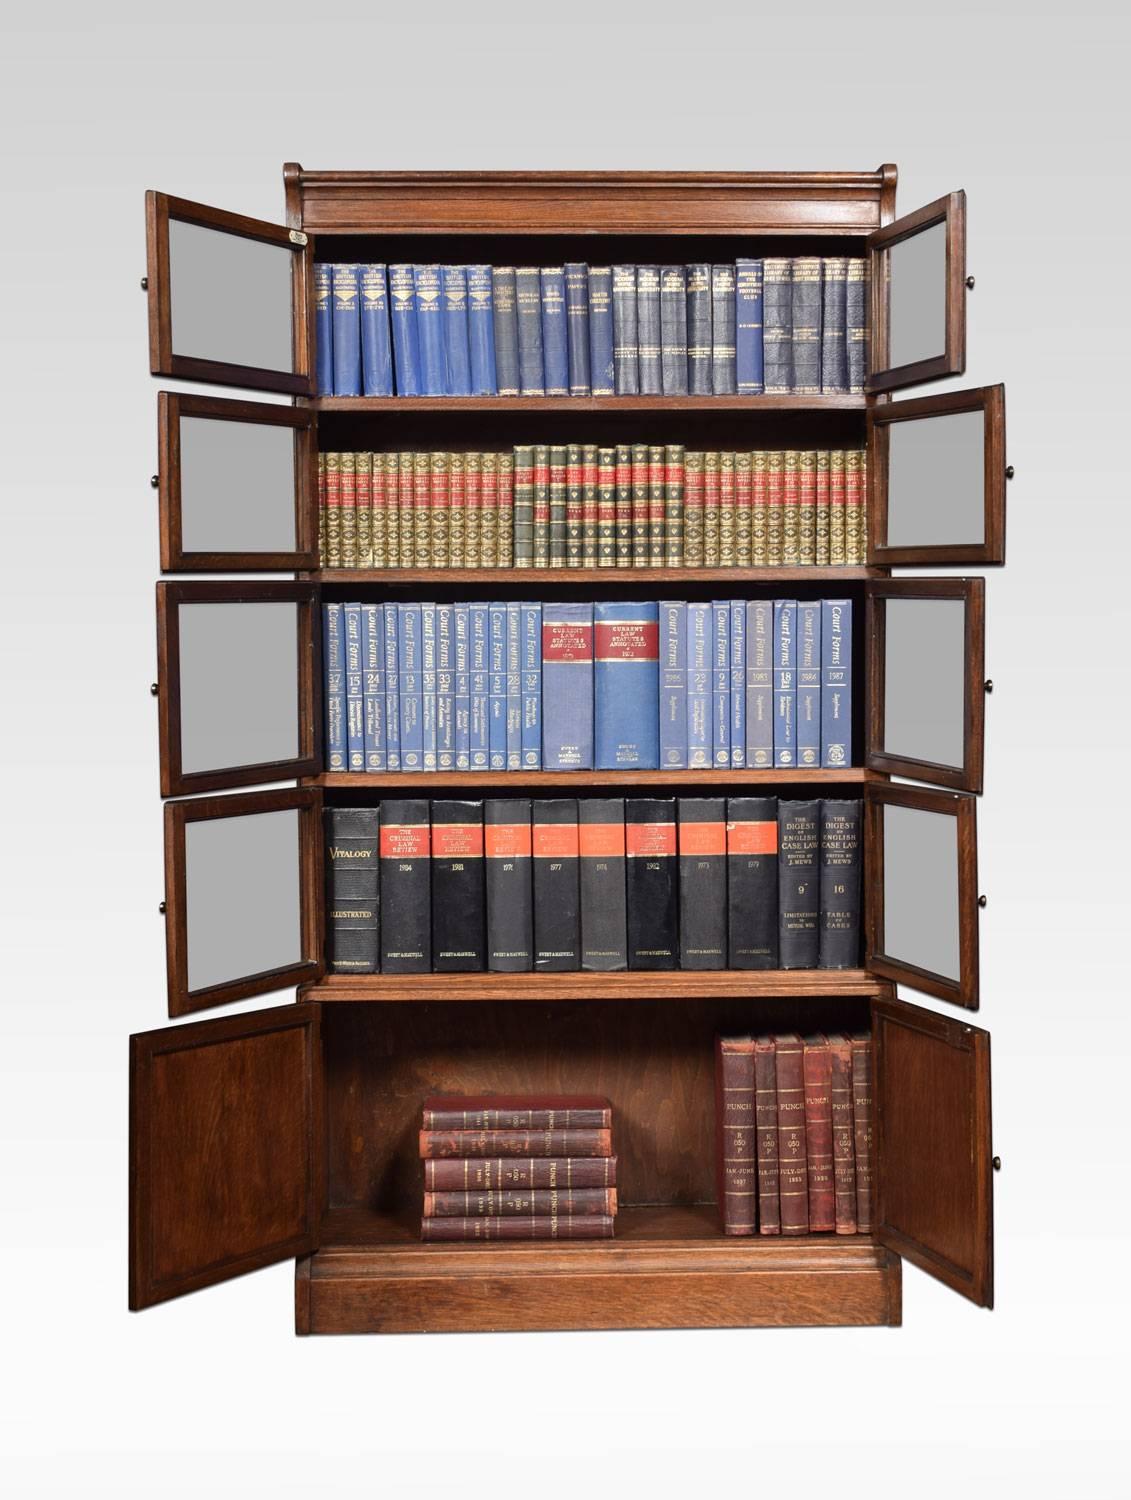 Oak five sectional bookcases by Minty Library specialist’s oxford, with a moulded top above four sections fitted with two glazed doors and brass knobs, the base section fitted with a pair of solid oak panel doors. All raised up on plinth